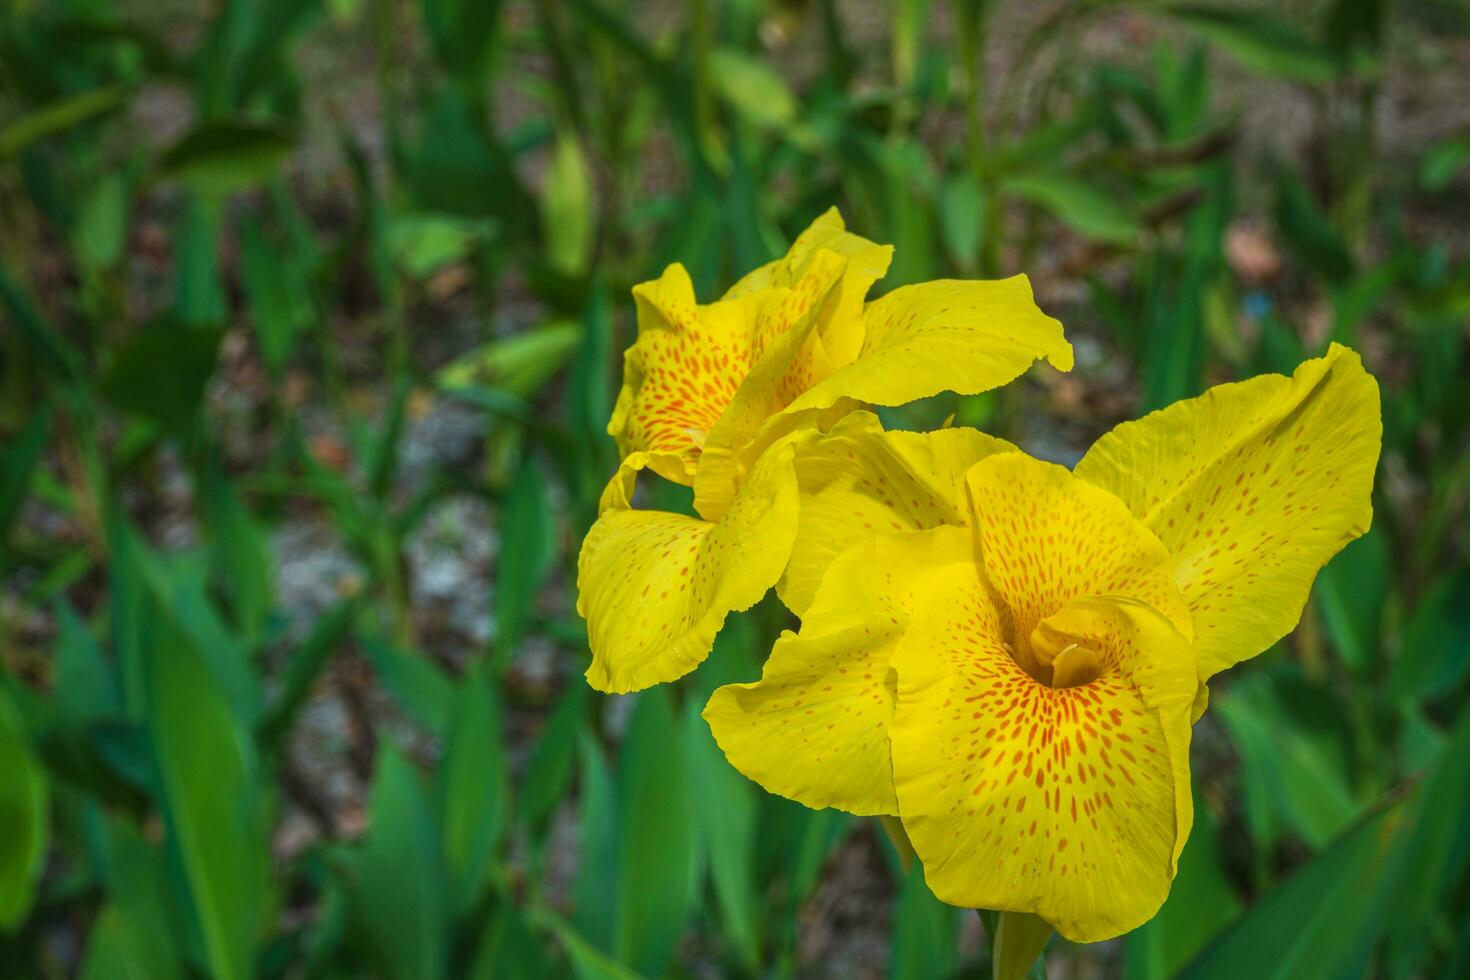 Close up of a blooming speckled yellow Canna Lily flower or India short plant on blurred natural green background with copy space. photo